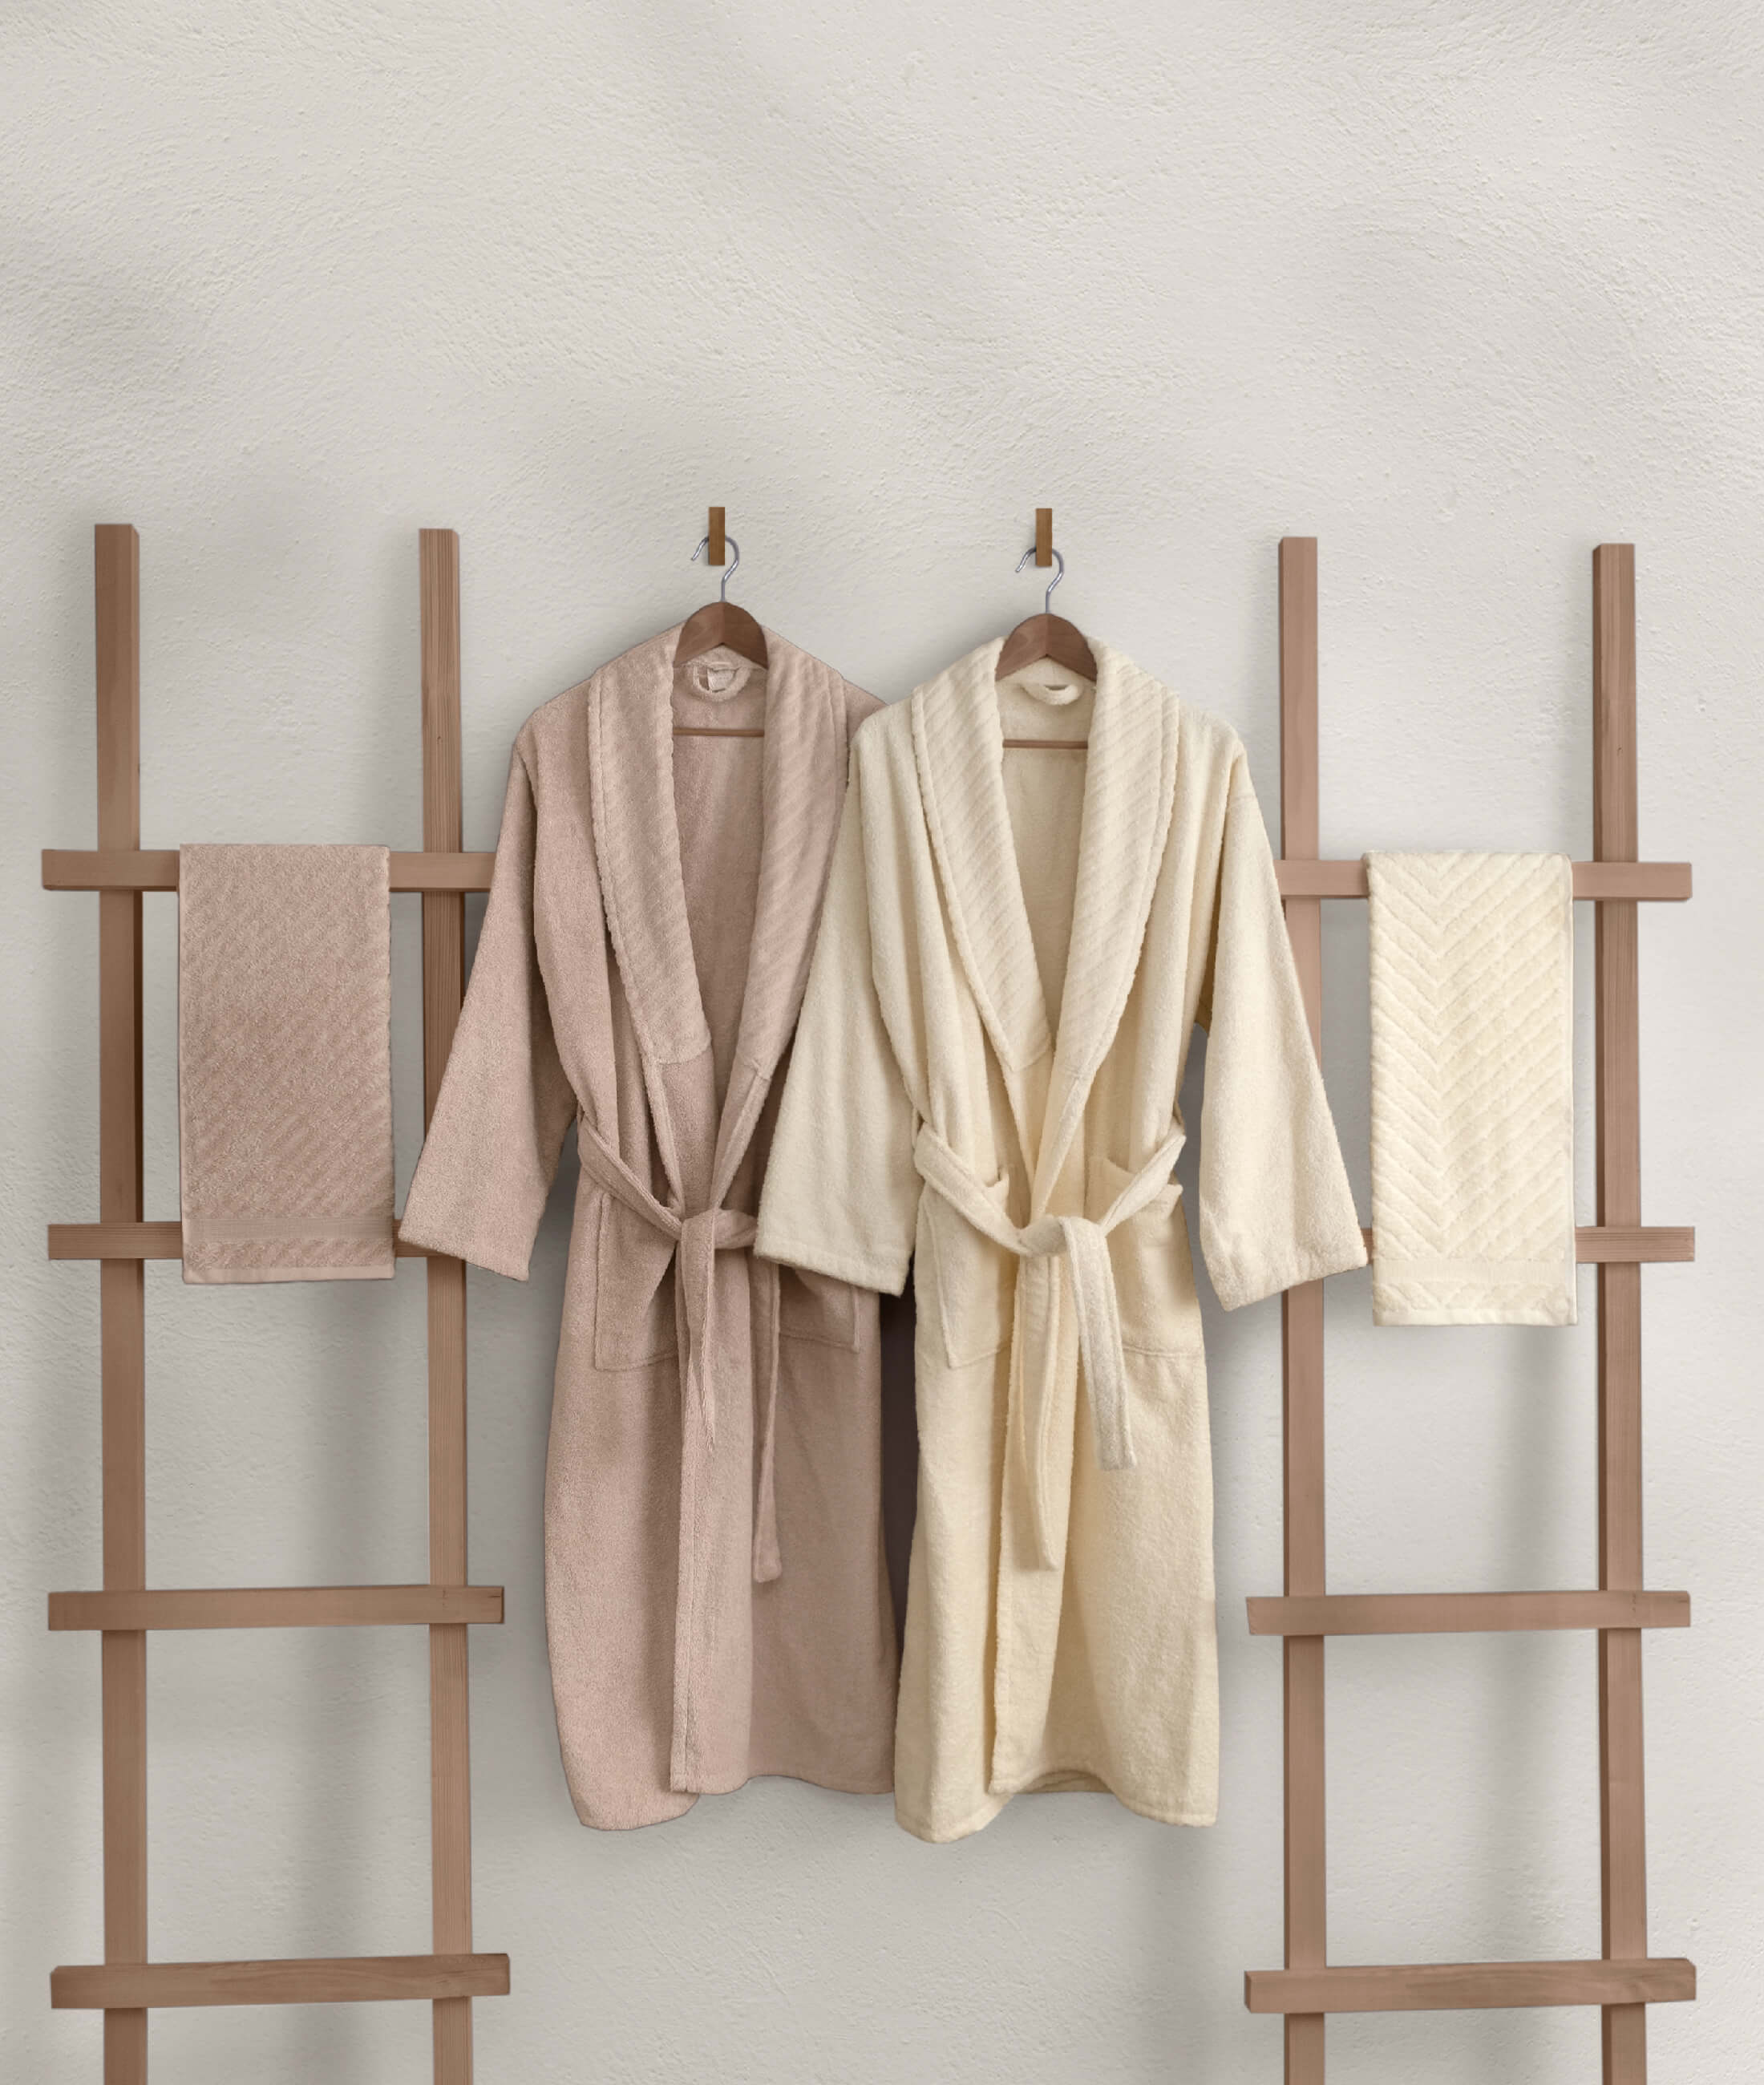 Lycian Salmon-Cream Set of 4 Family Bathrobes and Towels 2 Bathrobes 2 Towels 1062A